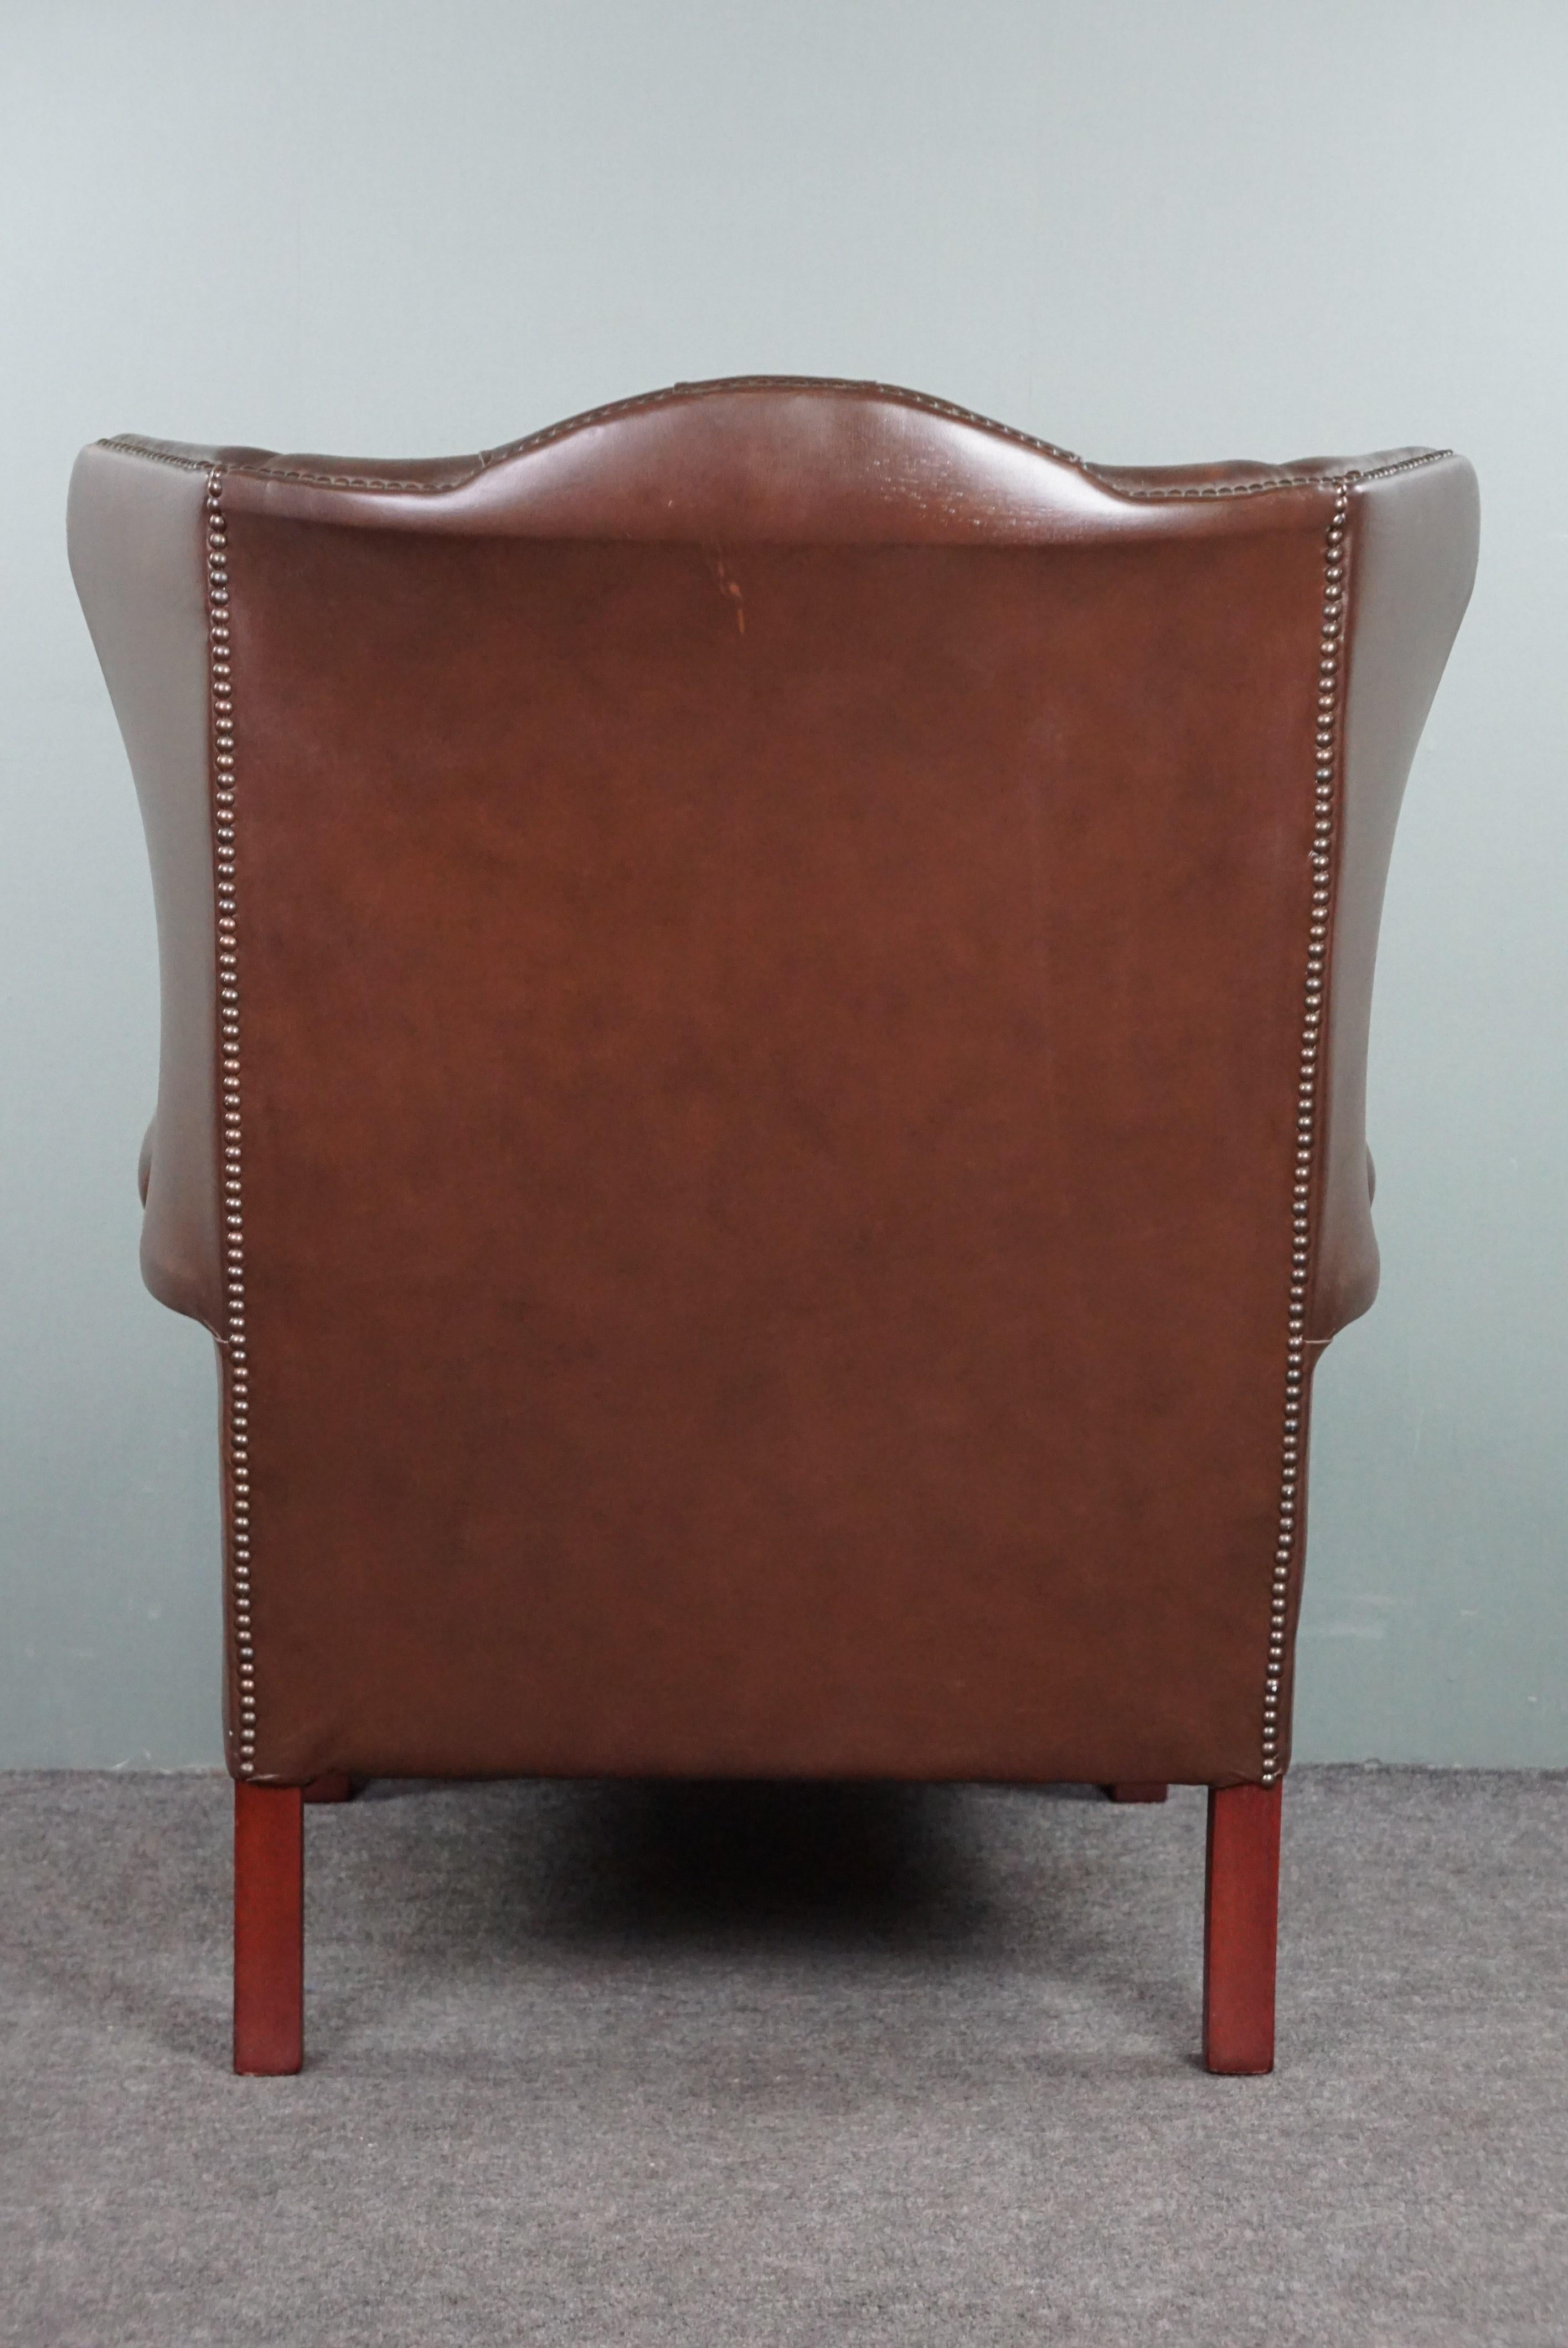 Leather Insanely colored Chesterfield wingback armchair. For Sale